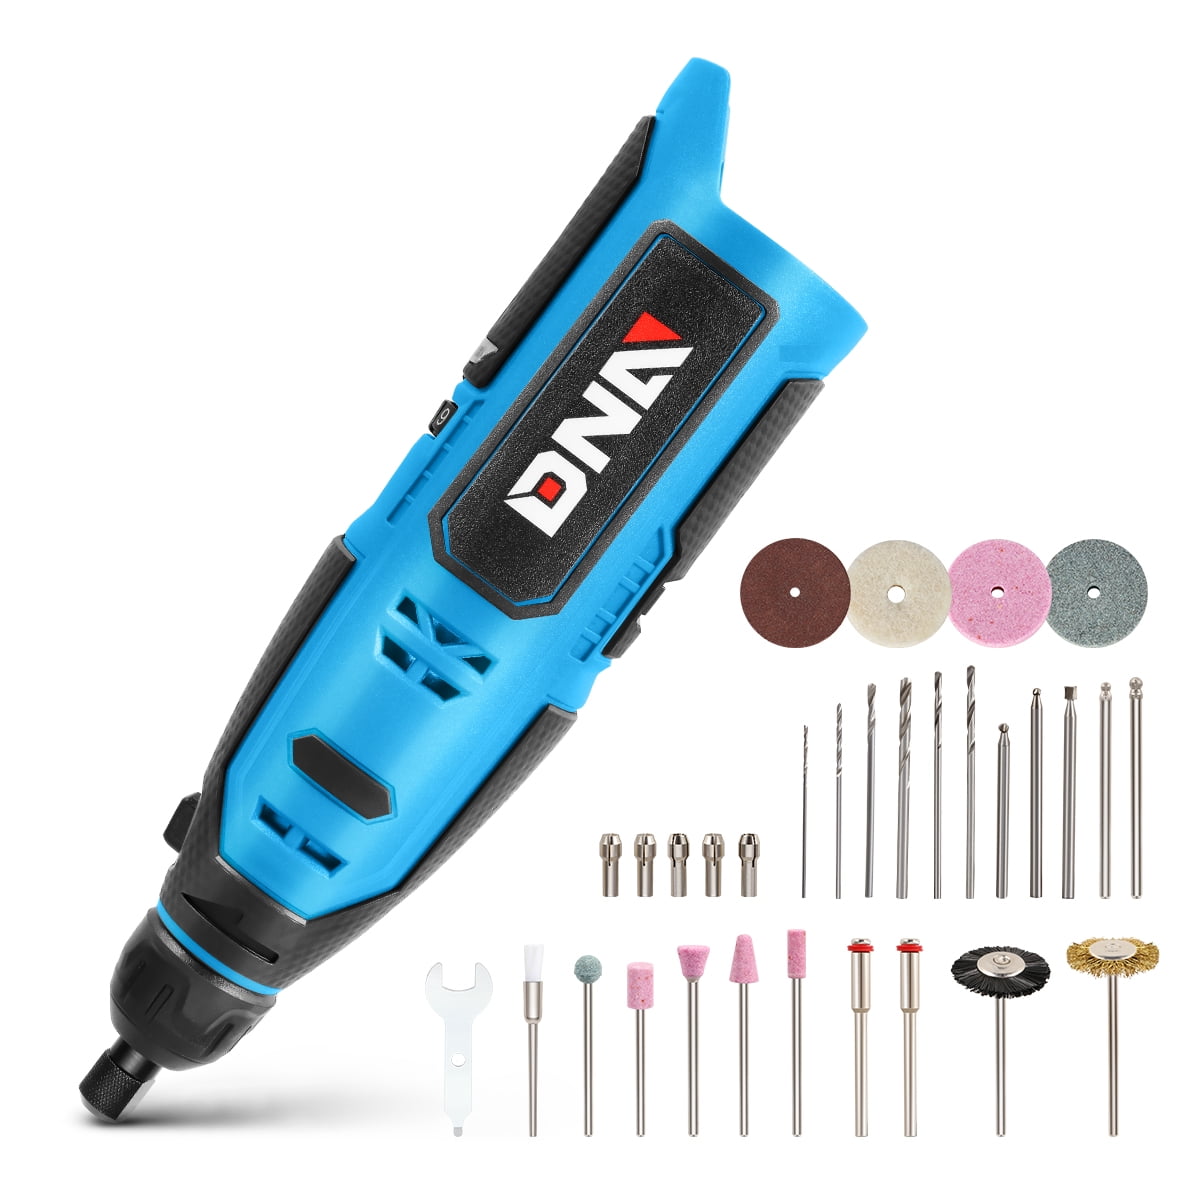 DNA Motoring Tools-00163 Rotary Tool Kit Electric Mini Grinder Set Grinding Polishing Cutting Drilling Tool 12V Variable Speed Blue